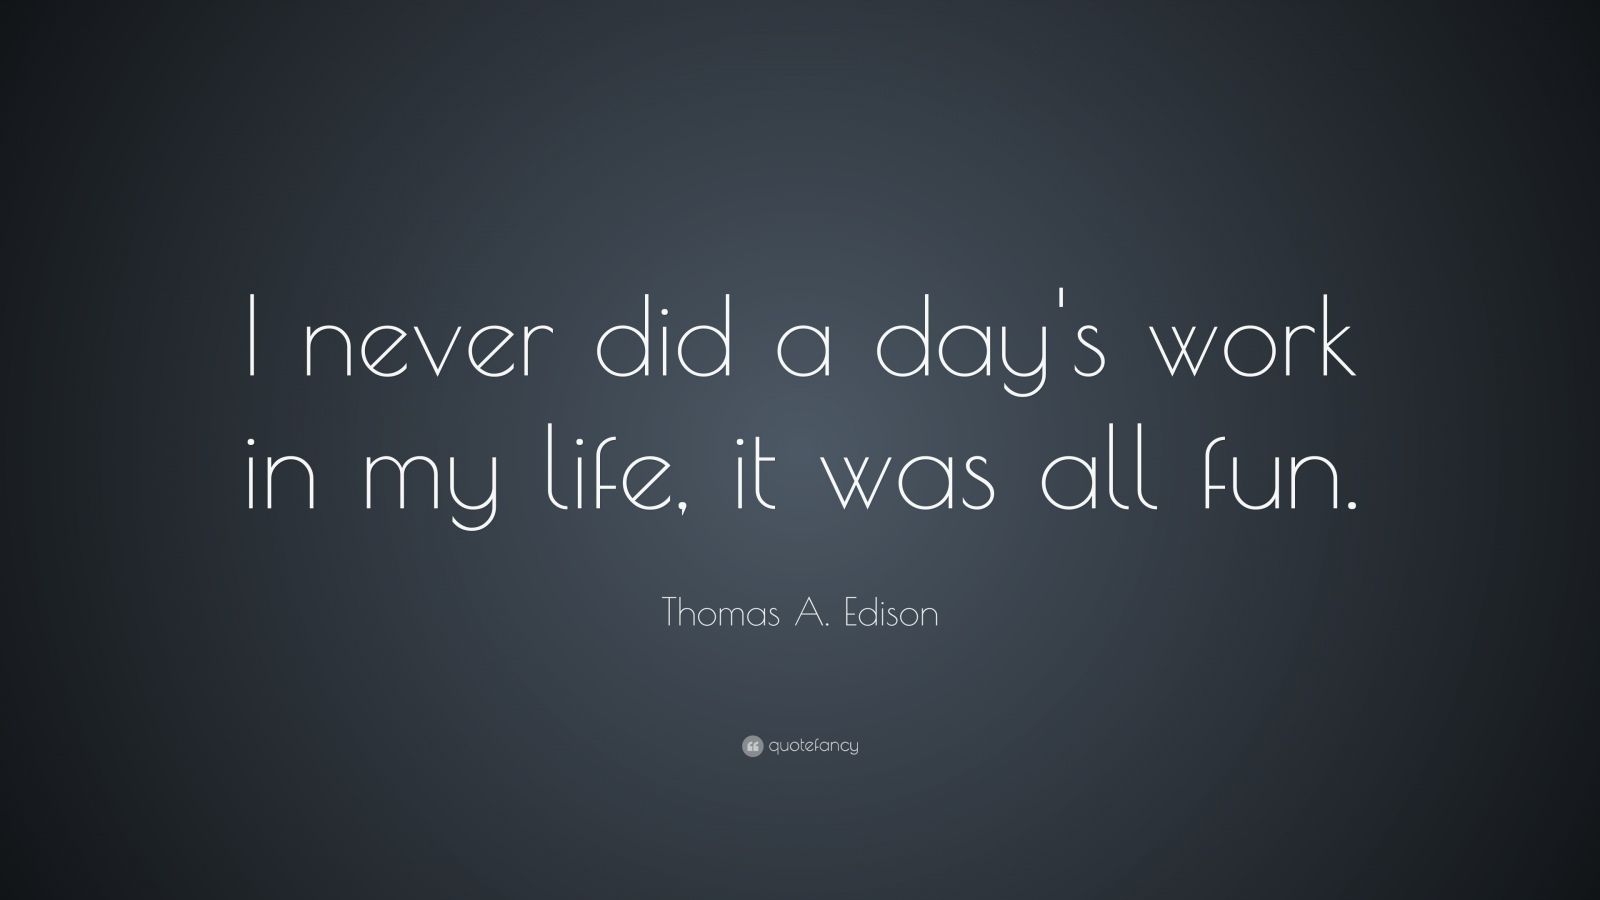 Thomas A. Edison Quote: “I never did a day's work in my life, it was all fun.” (7 ...1600 x 900